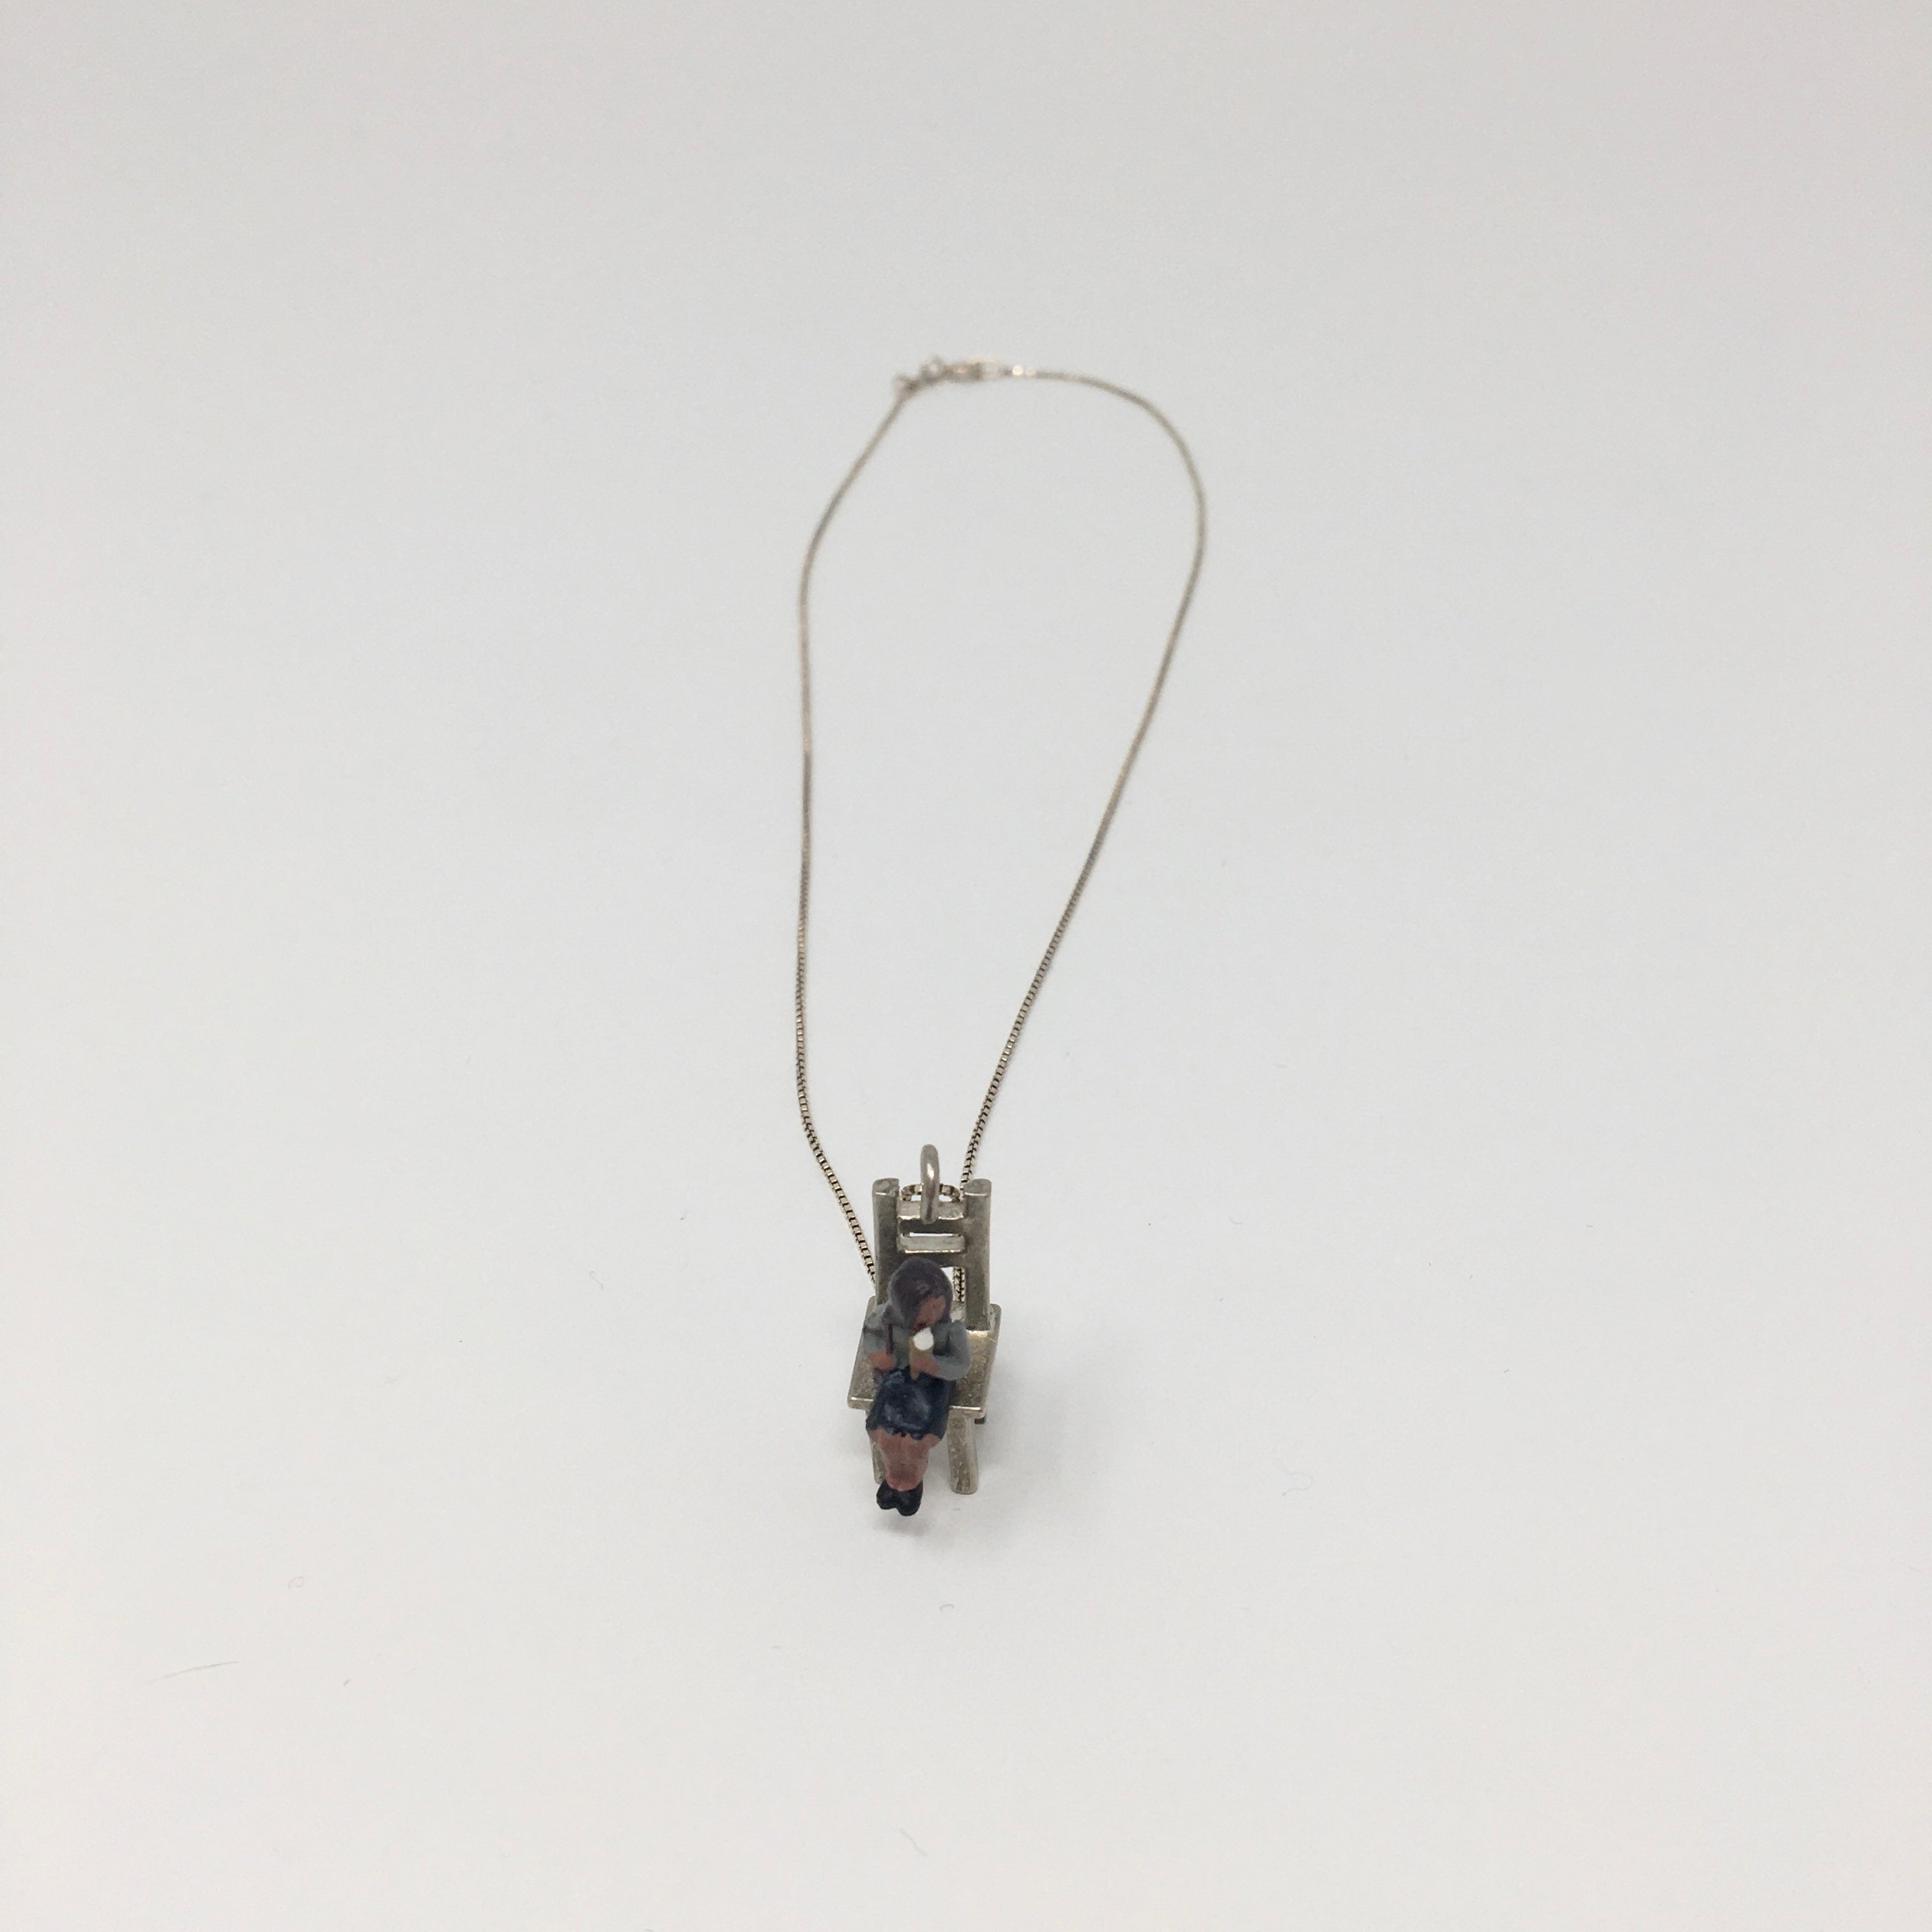 Sitting People Necklace by Kristin Lora